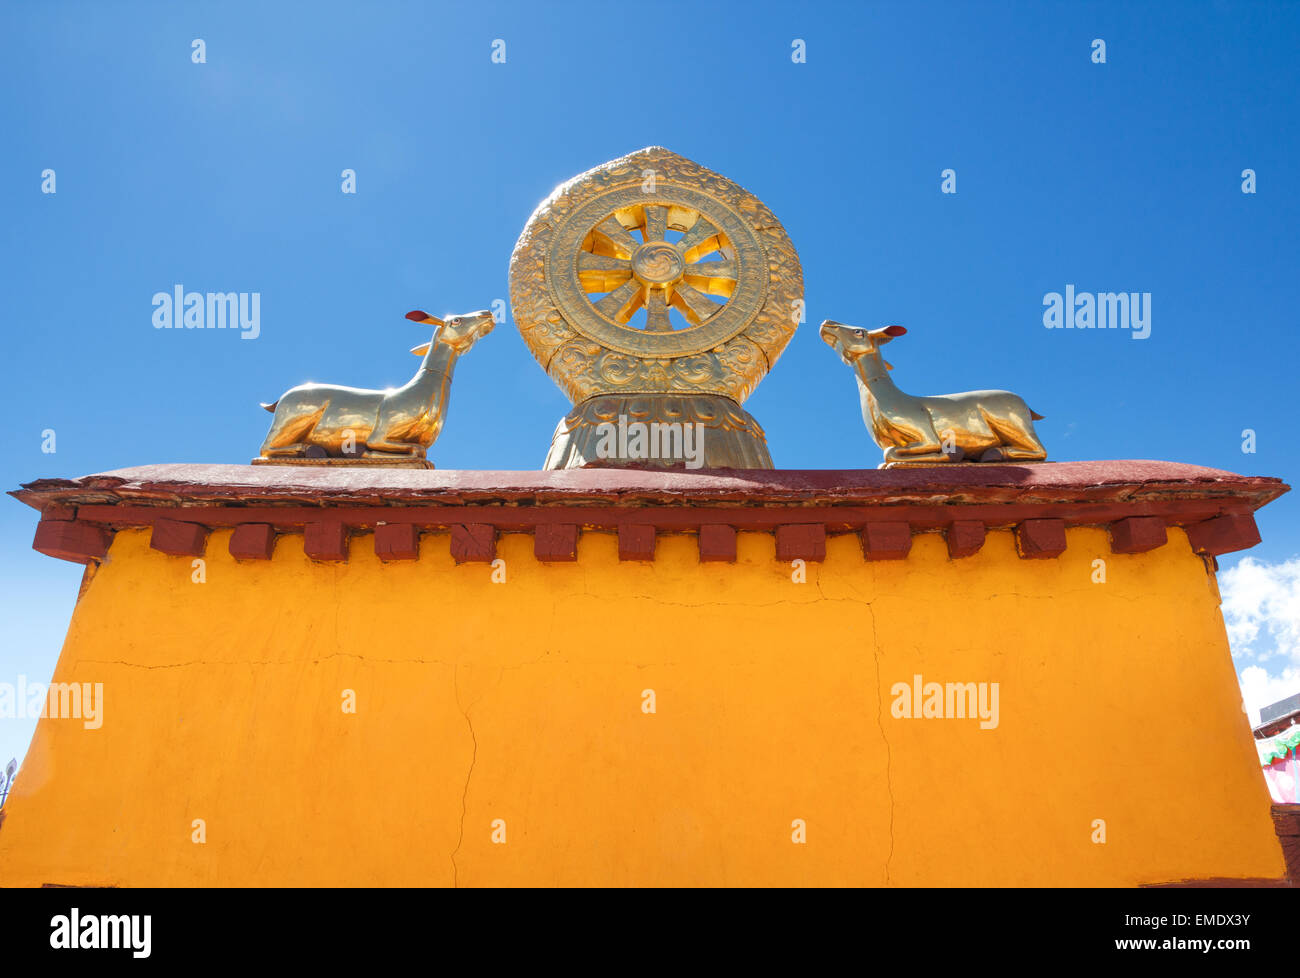 Rooftop statues of two golden deer flanking a Dharma wheel on the Jokhang Temple in Lhasa, Tibetaanse Autonome Regio, China. The Stock Photo